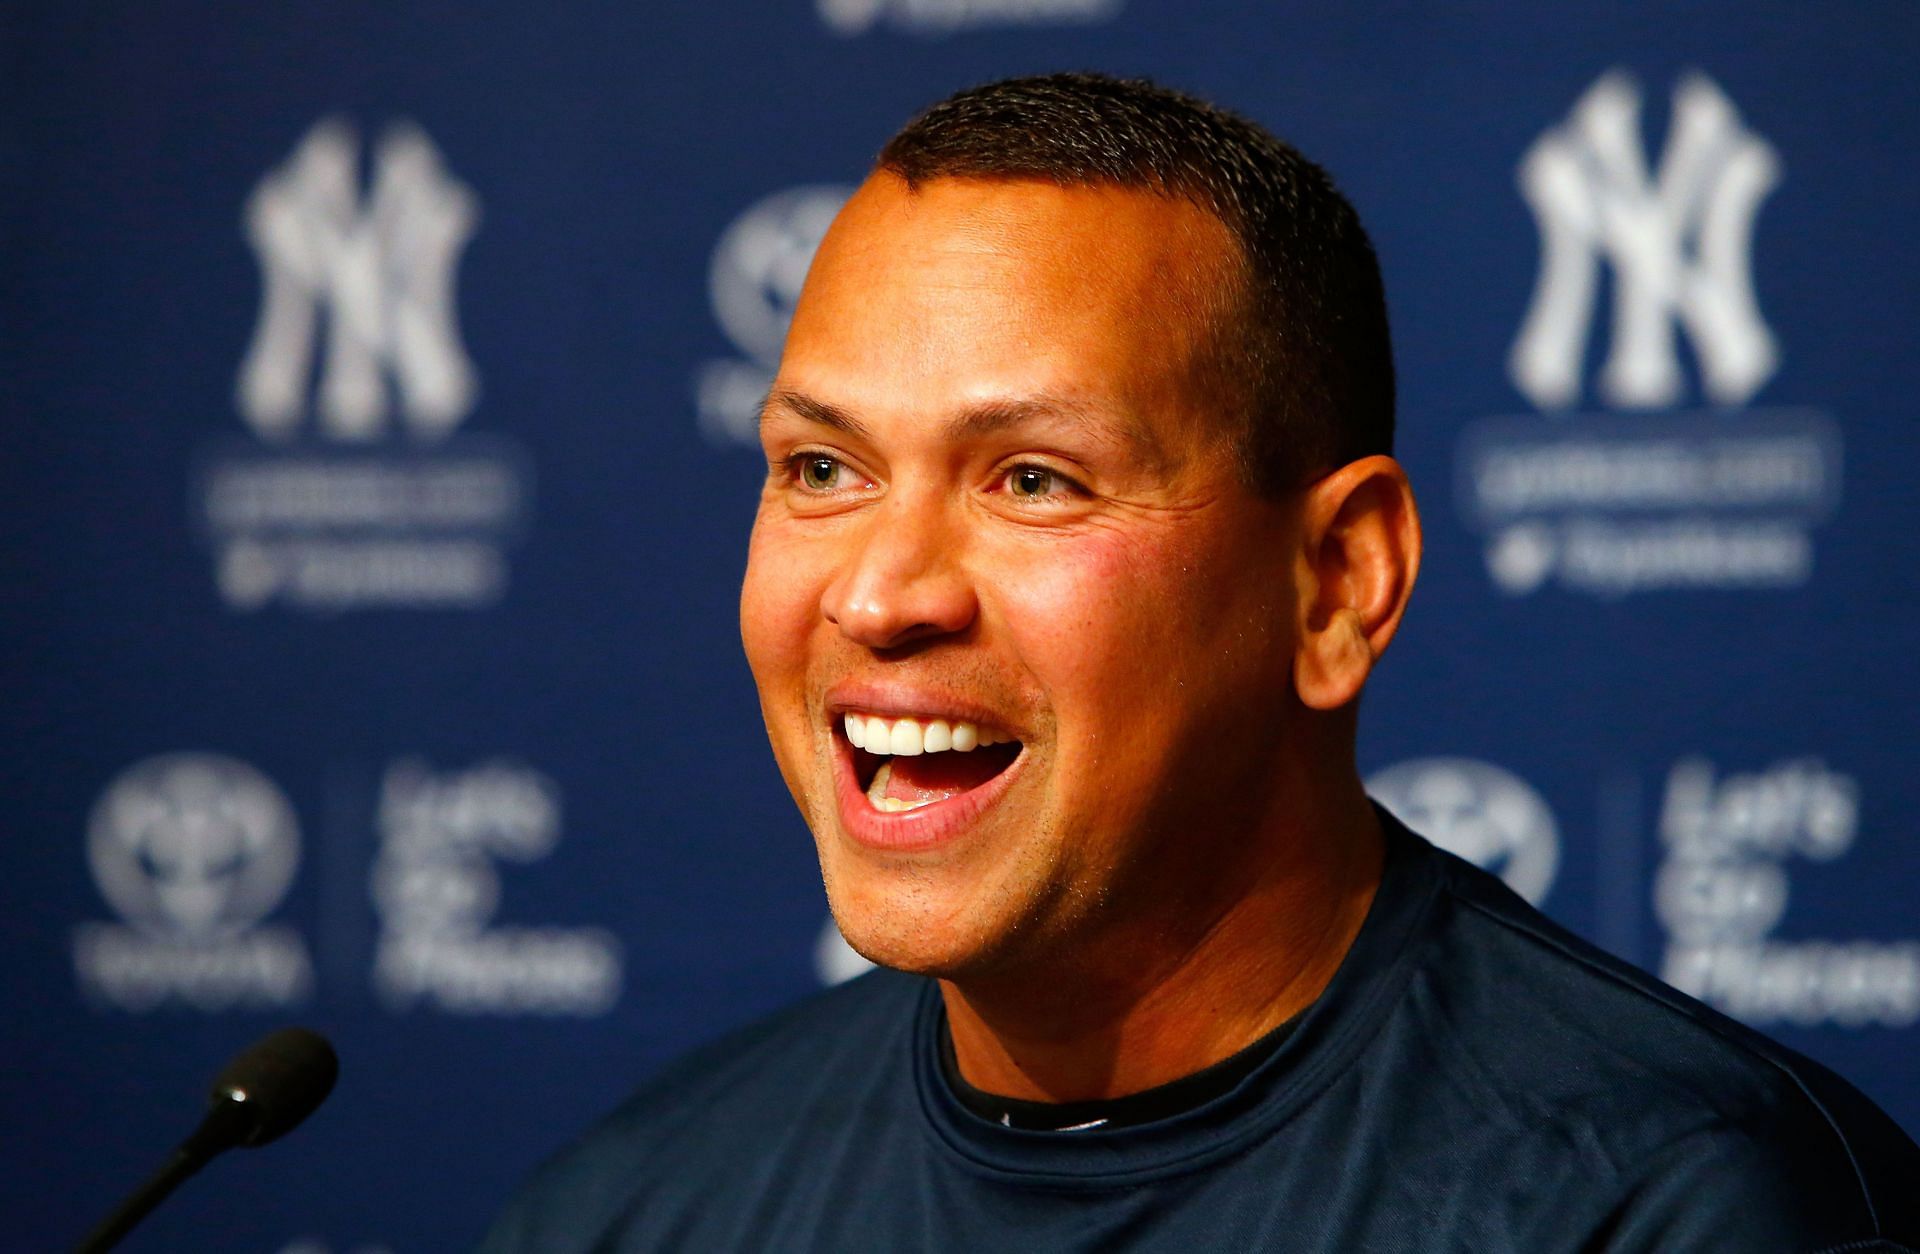 SEE IT: Alex Rodriguez faces toddler baseball prodigy in hitting